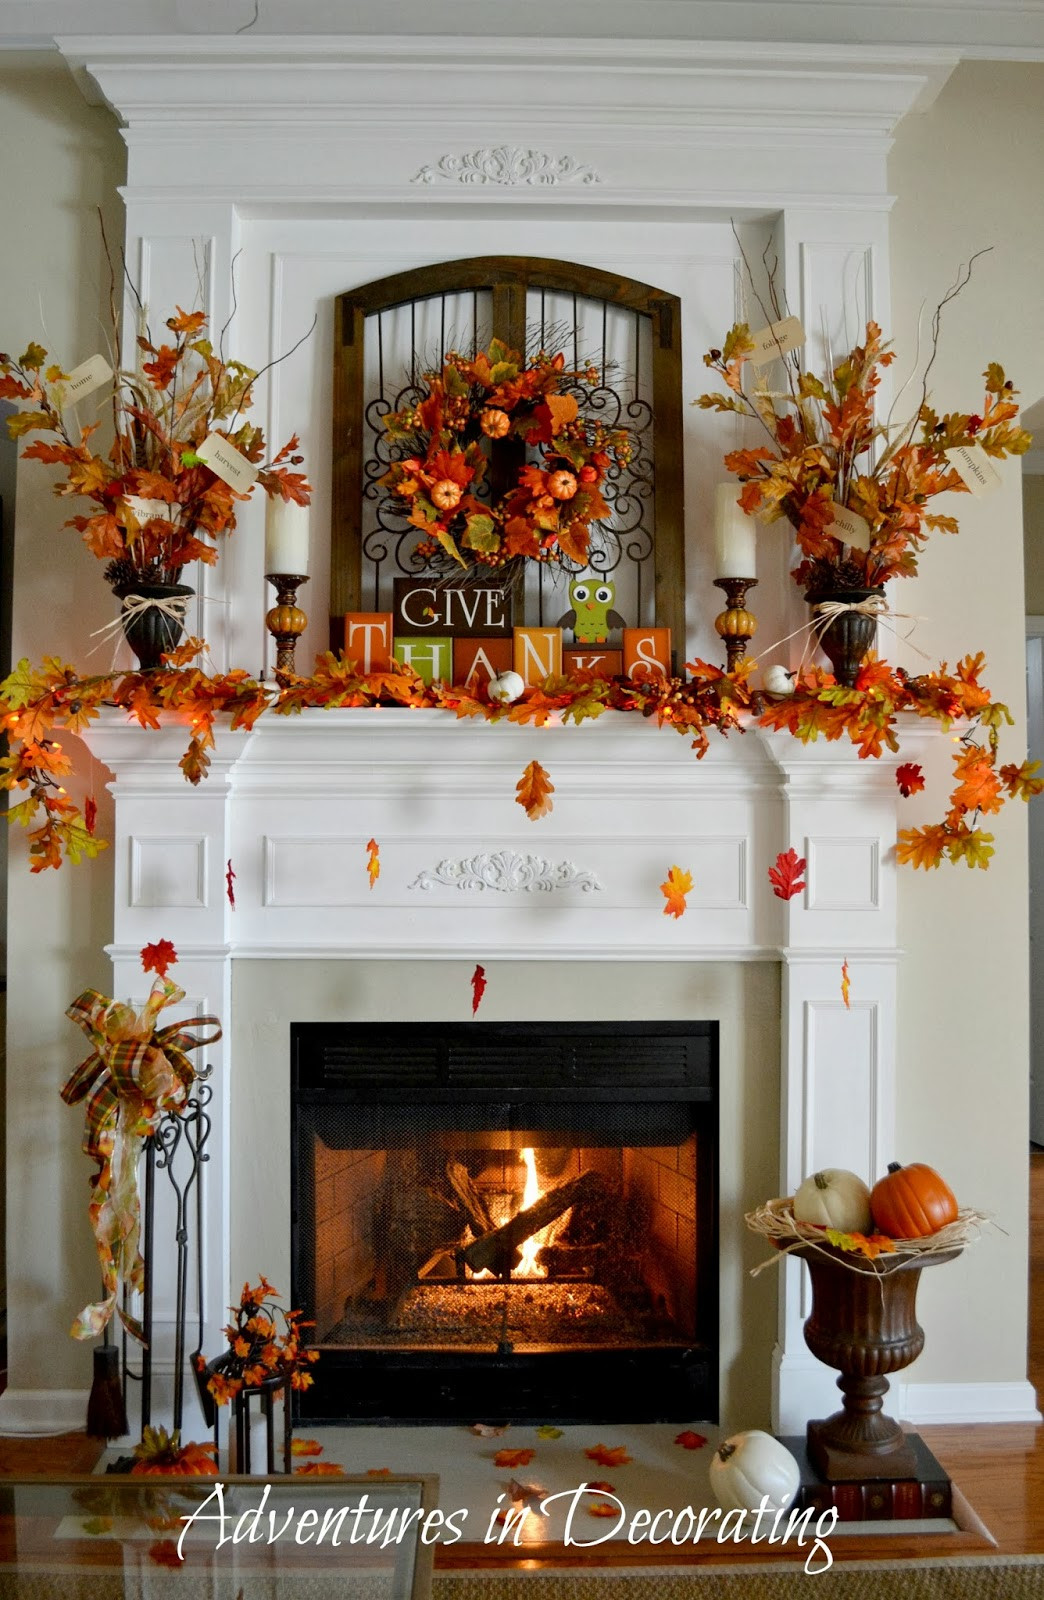 Fall Decorations Fireplace Mantel
 Adventures in Decorating Our Fall Mantel